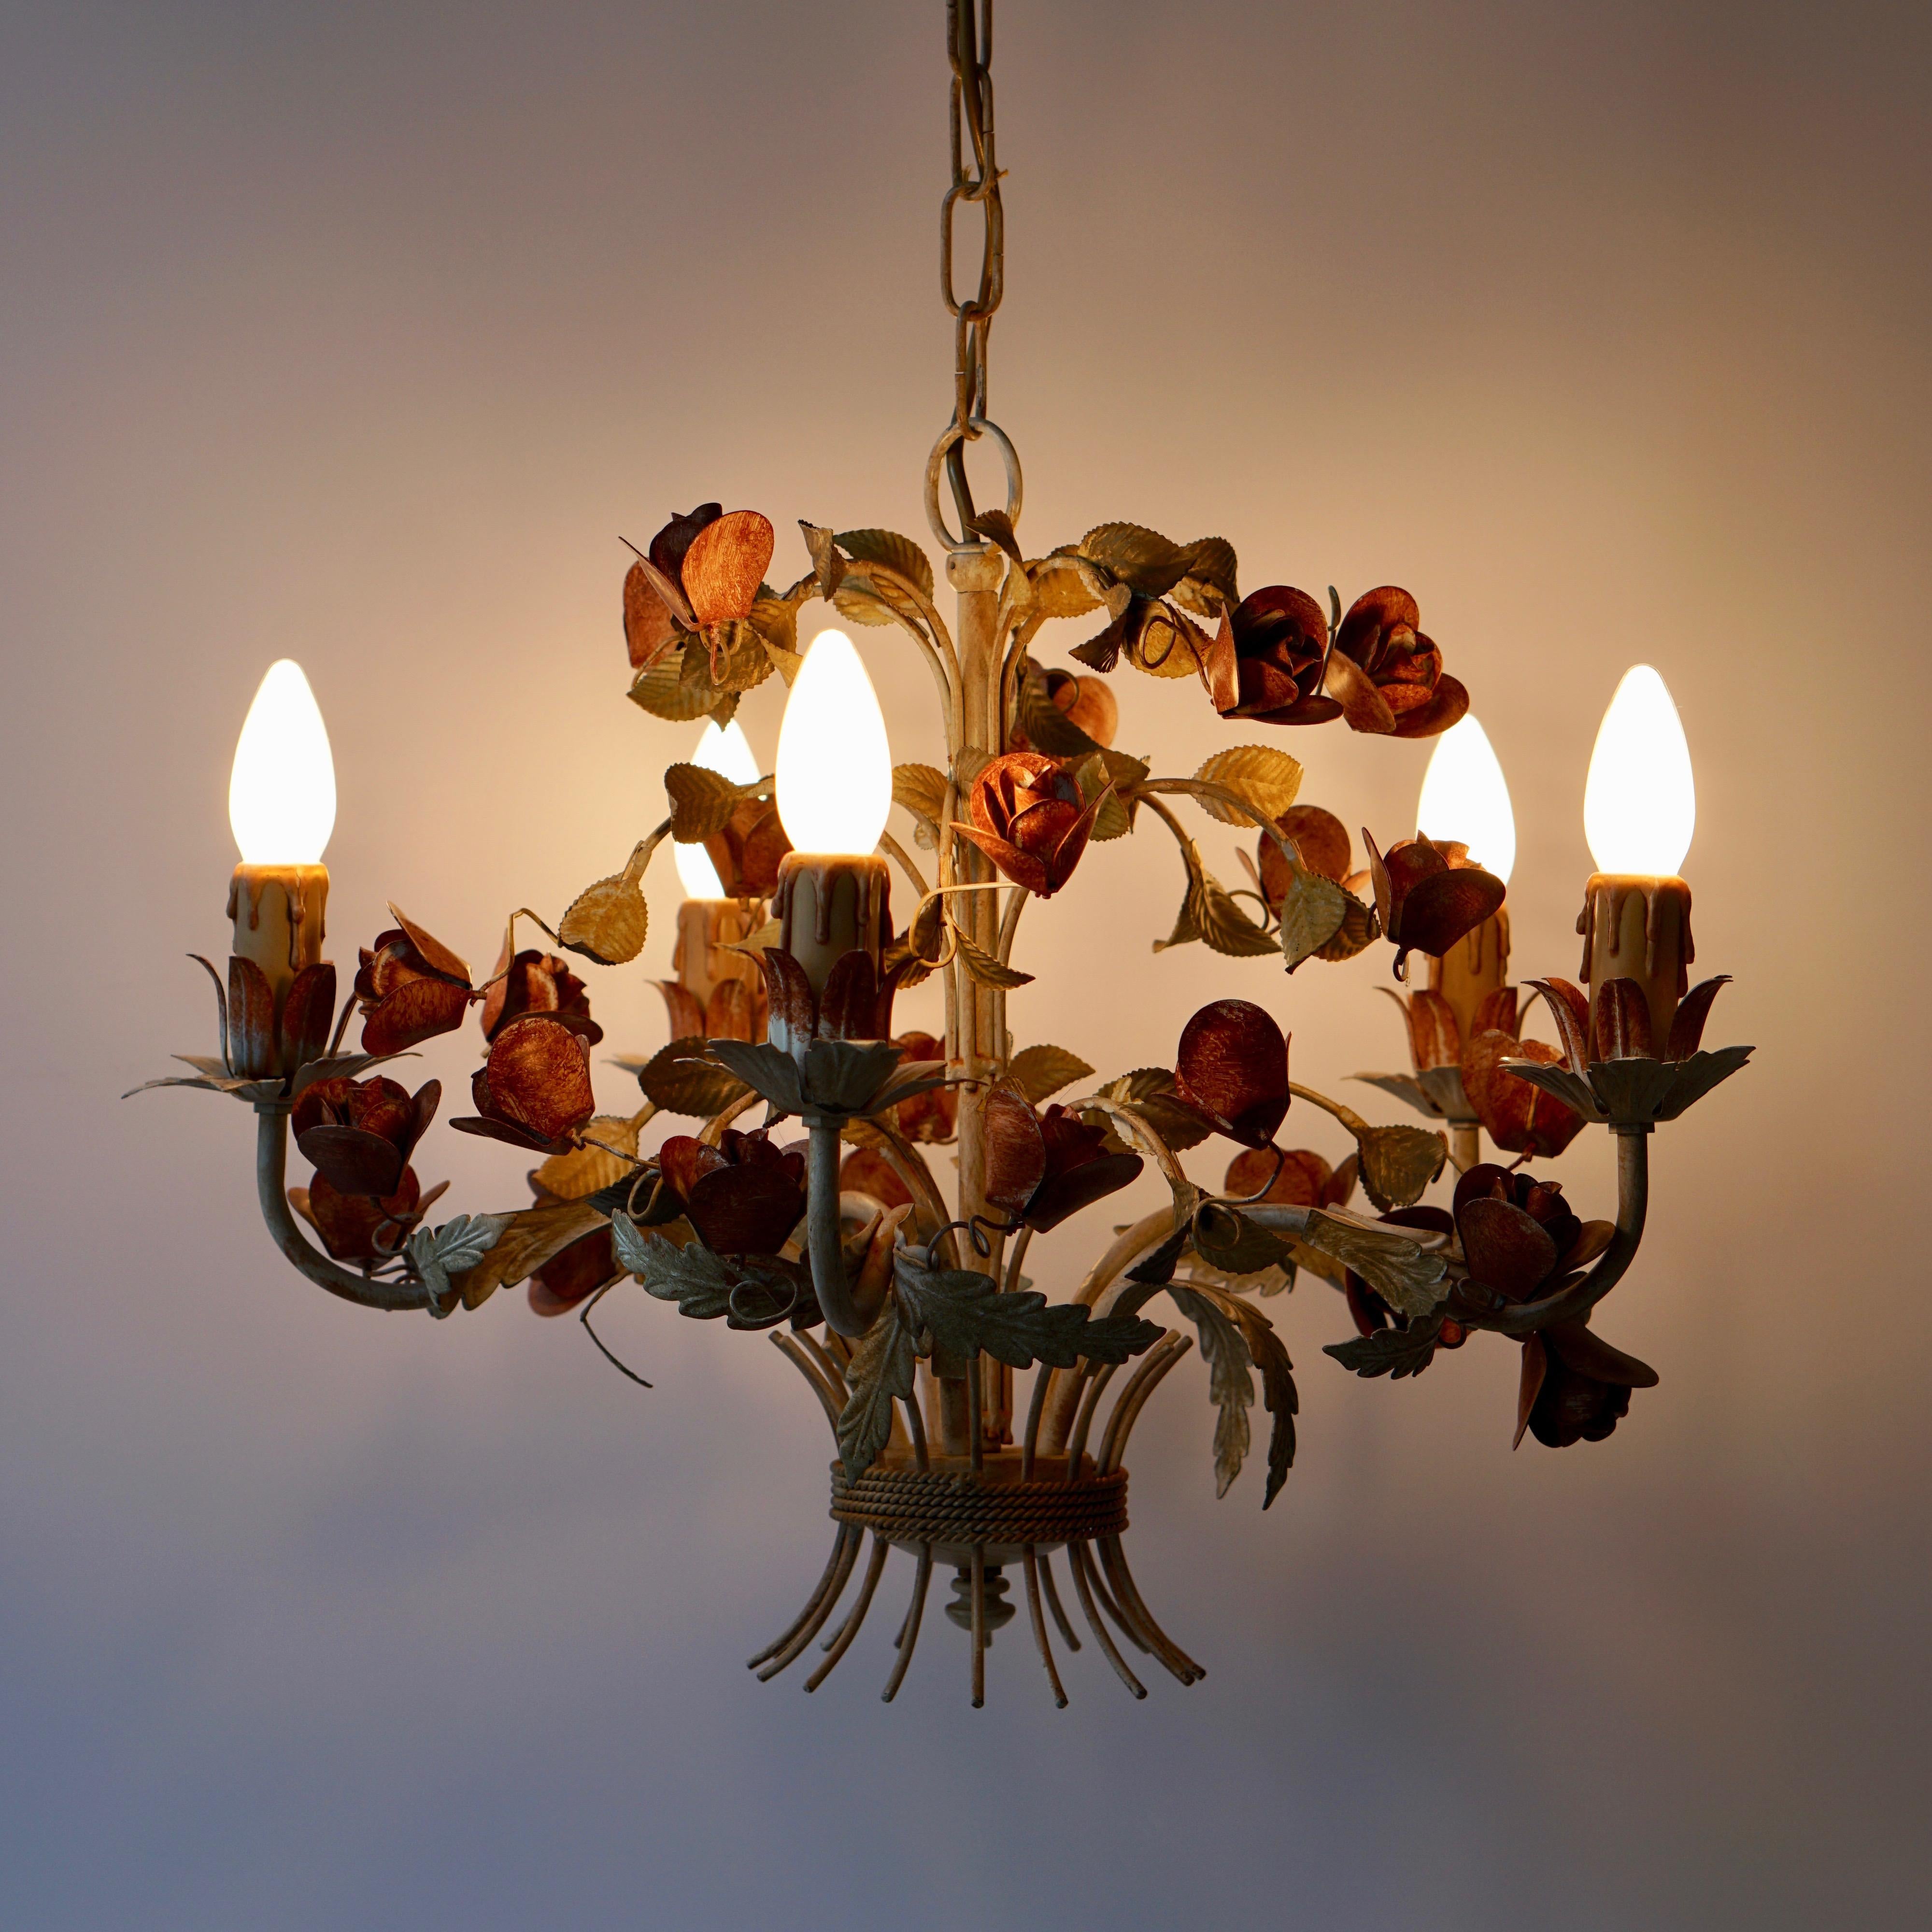 Mid-20th Century Italian Painted Iron and Tole Chandelier with Flowers 13